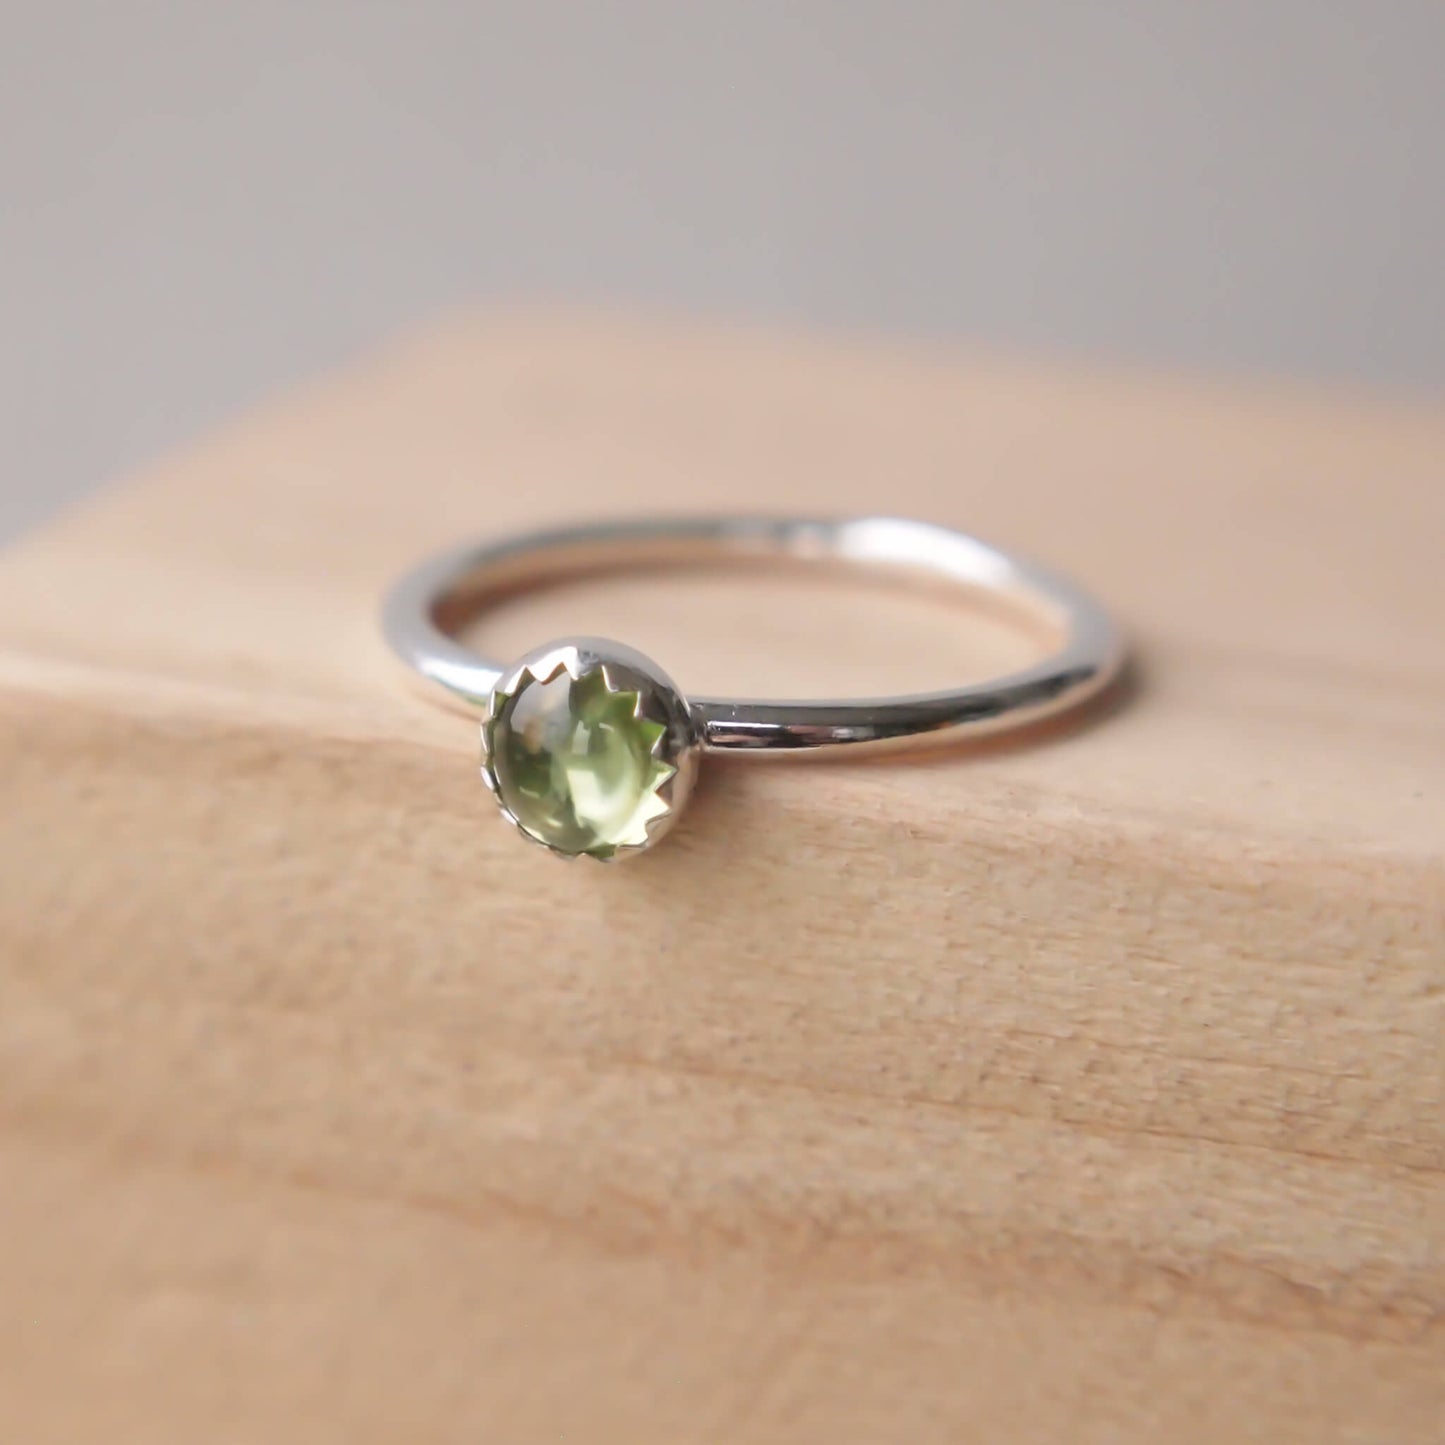 Peridot and sterling silver simple gemstone ring with a peridot 5mm cabochon. Handmade in Scotland by maram jewellery